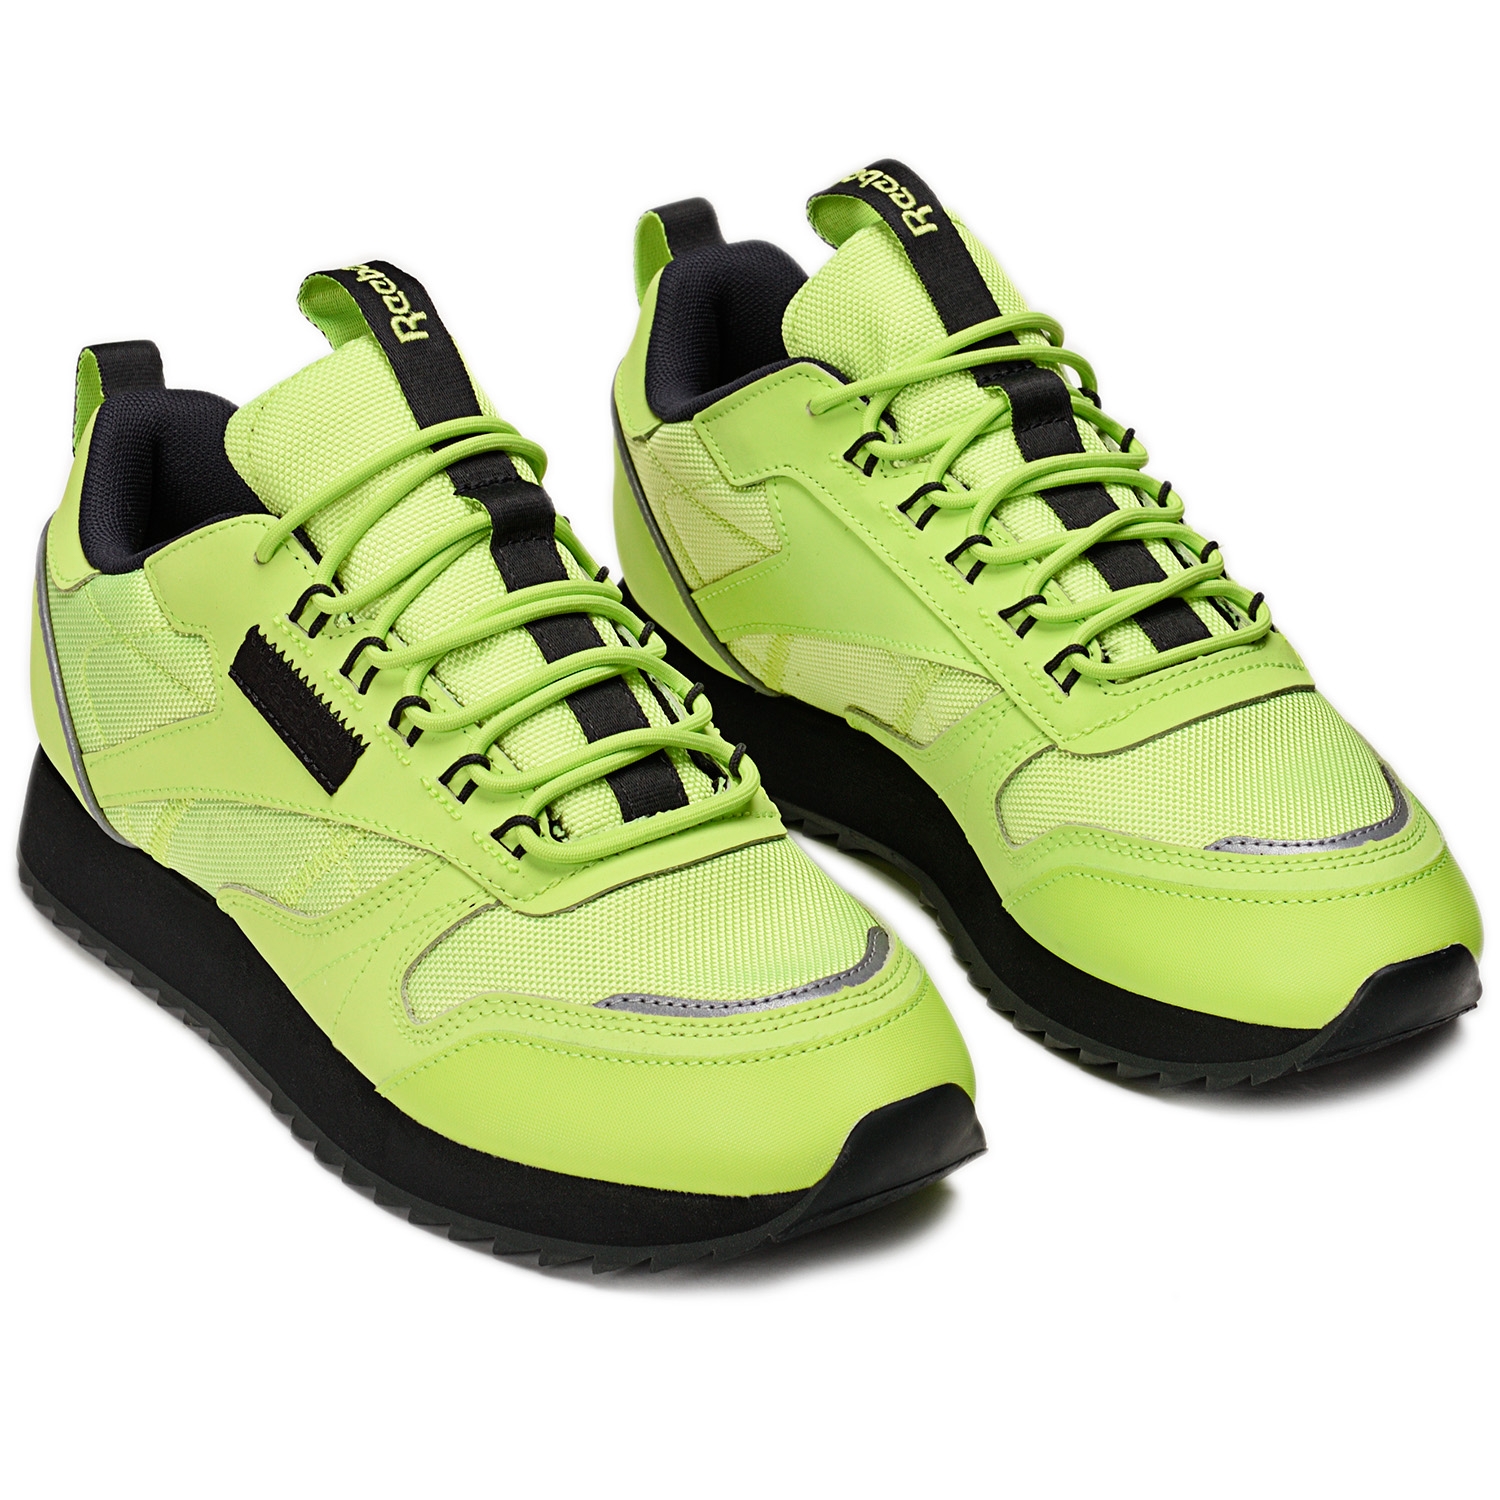 REEBOK CLASSIC LEATHER RIPPLE TRAIL NEON LIME/NEON LIME/TRUE GREY 8